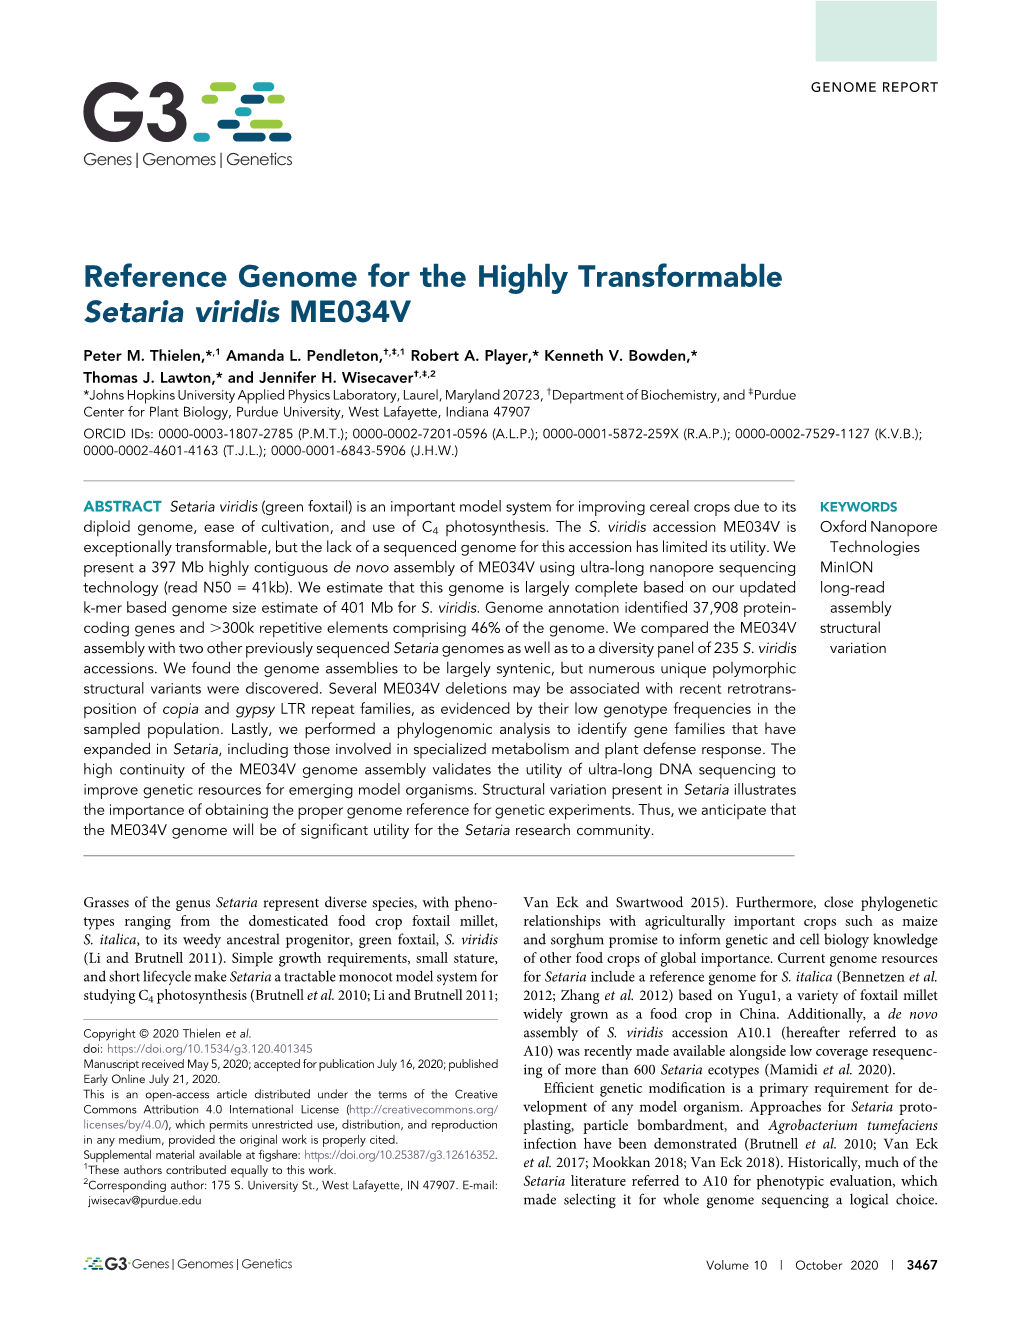 Reference Genome for the Highly Transformable Setaria Viridis ME034V